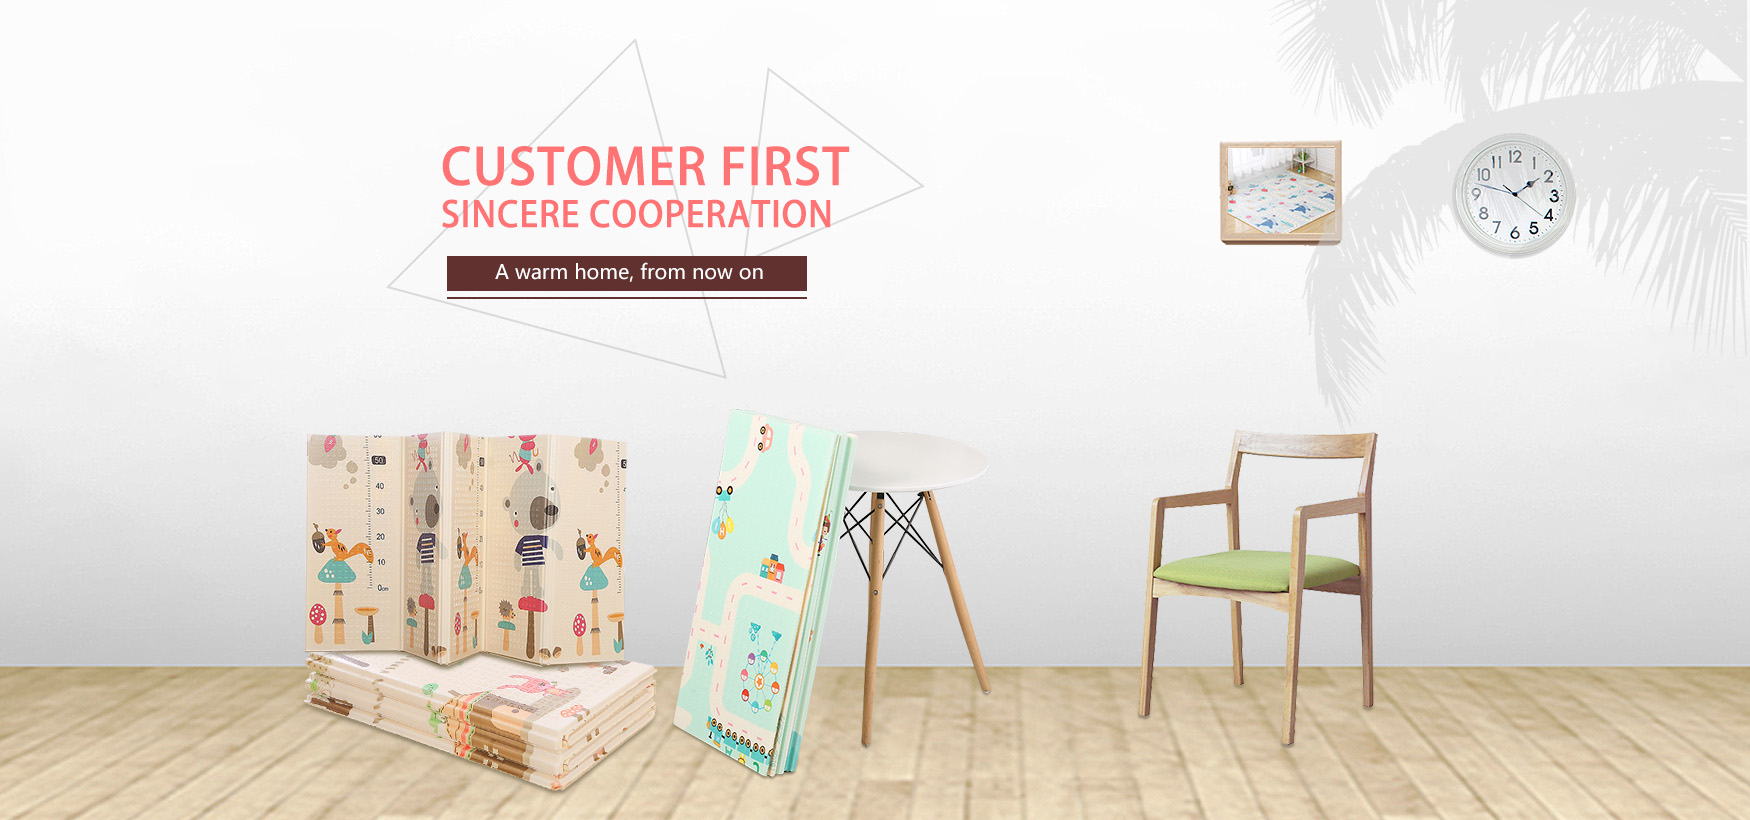 customer first sincere cooperation